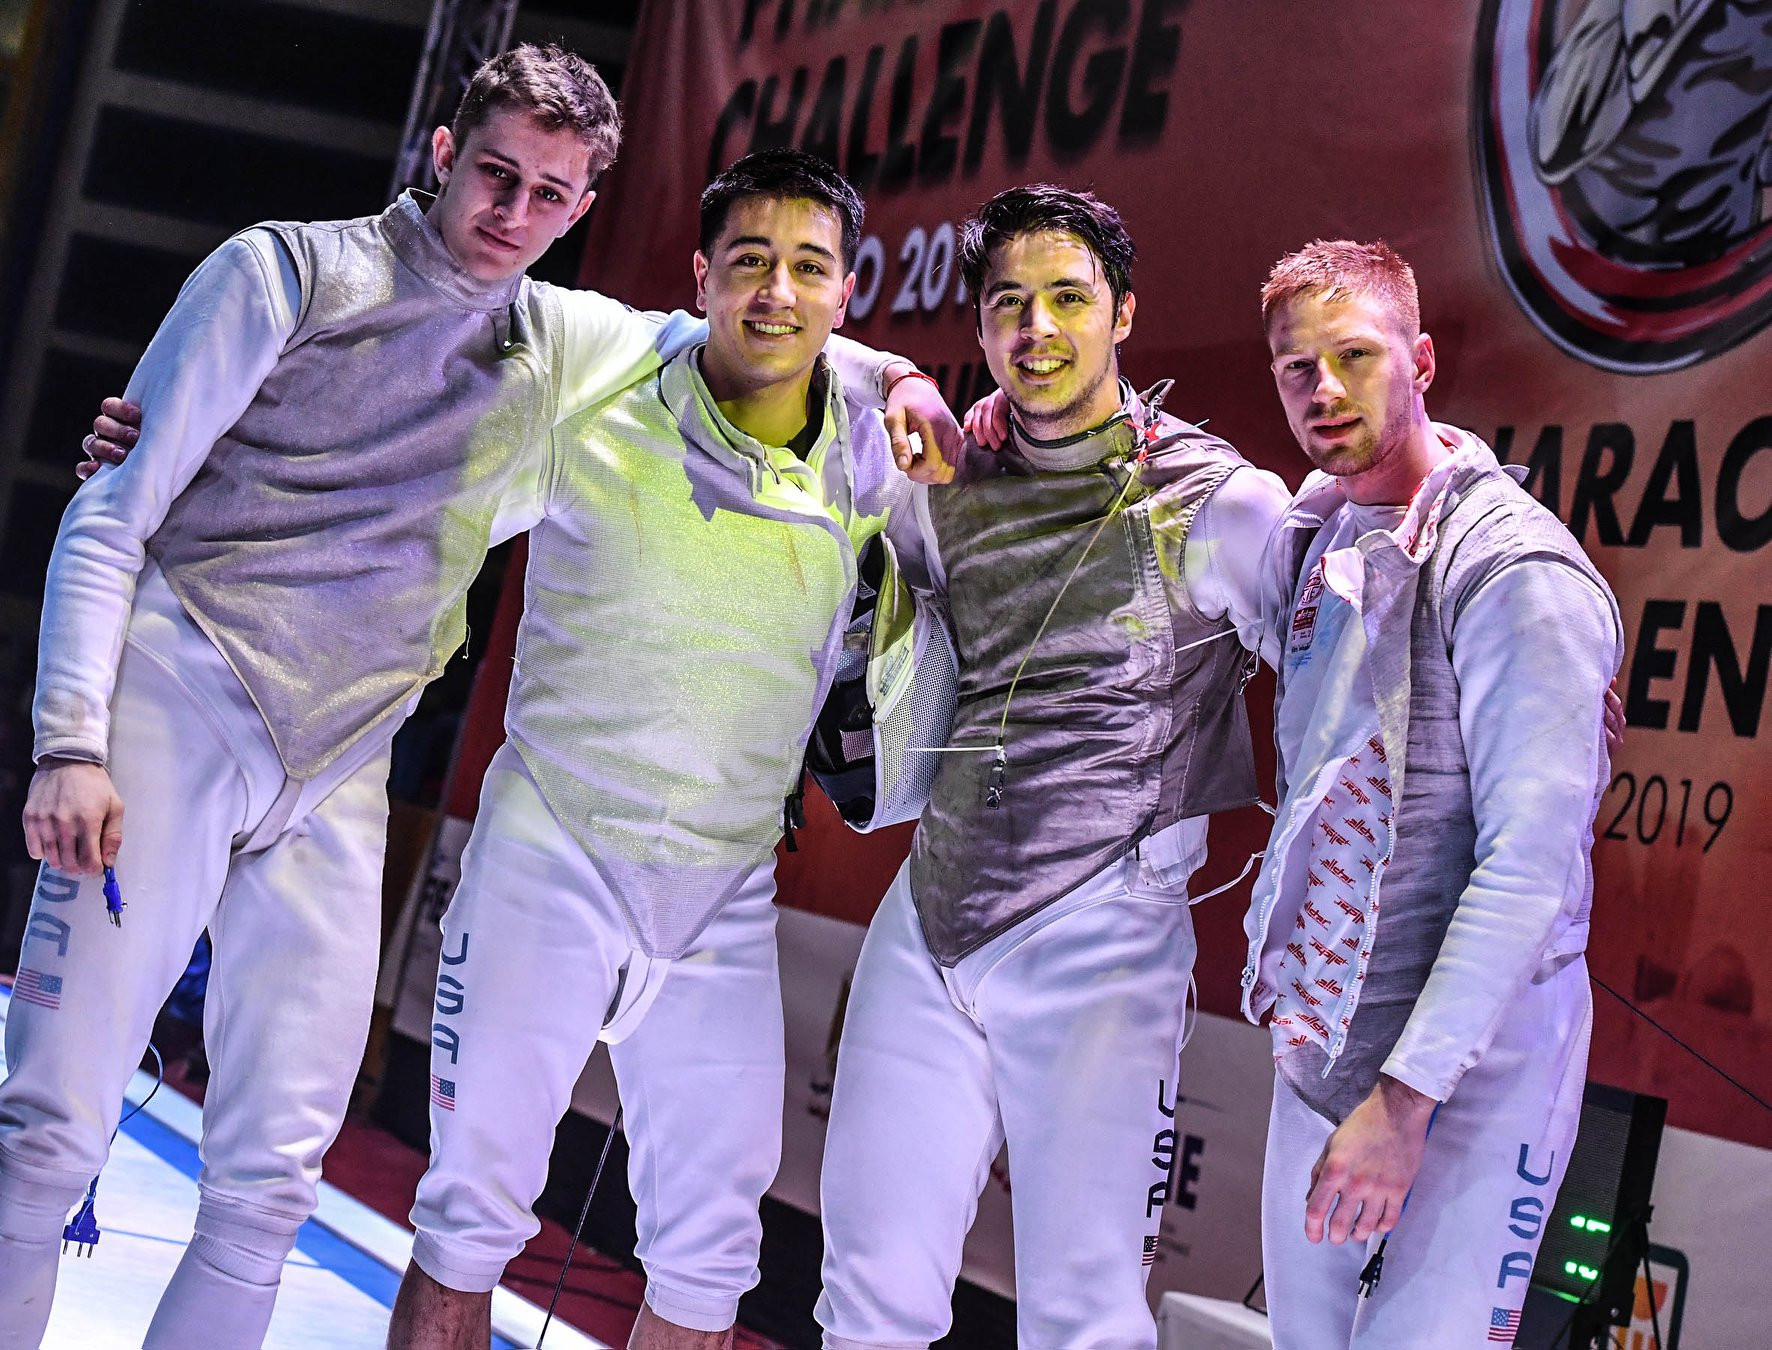 The United States beat France to the team gold medal on the last day of competition at the FIE Men's Foil World Cup in Cairo ©Augusto Bizzi/FIE/Facebook